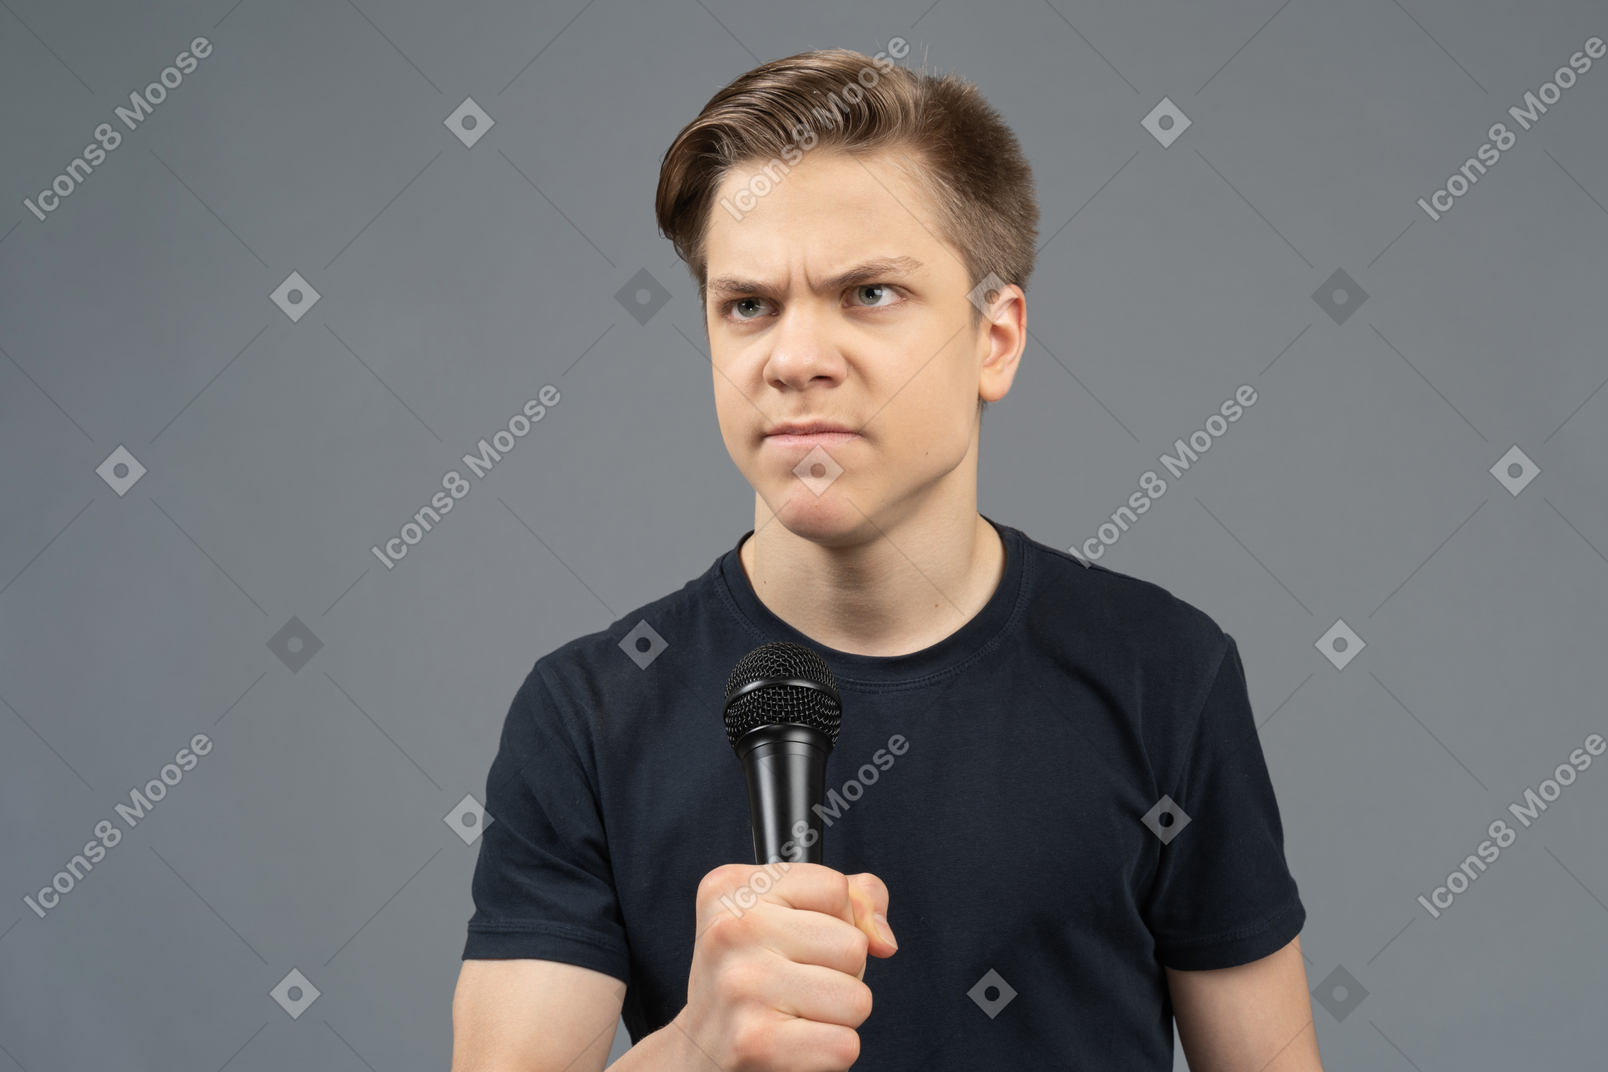 Angry young man holding microphone